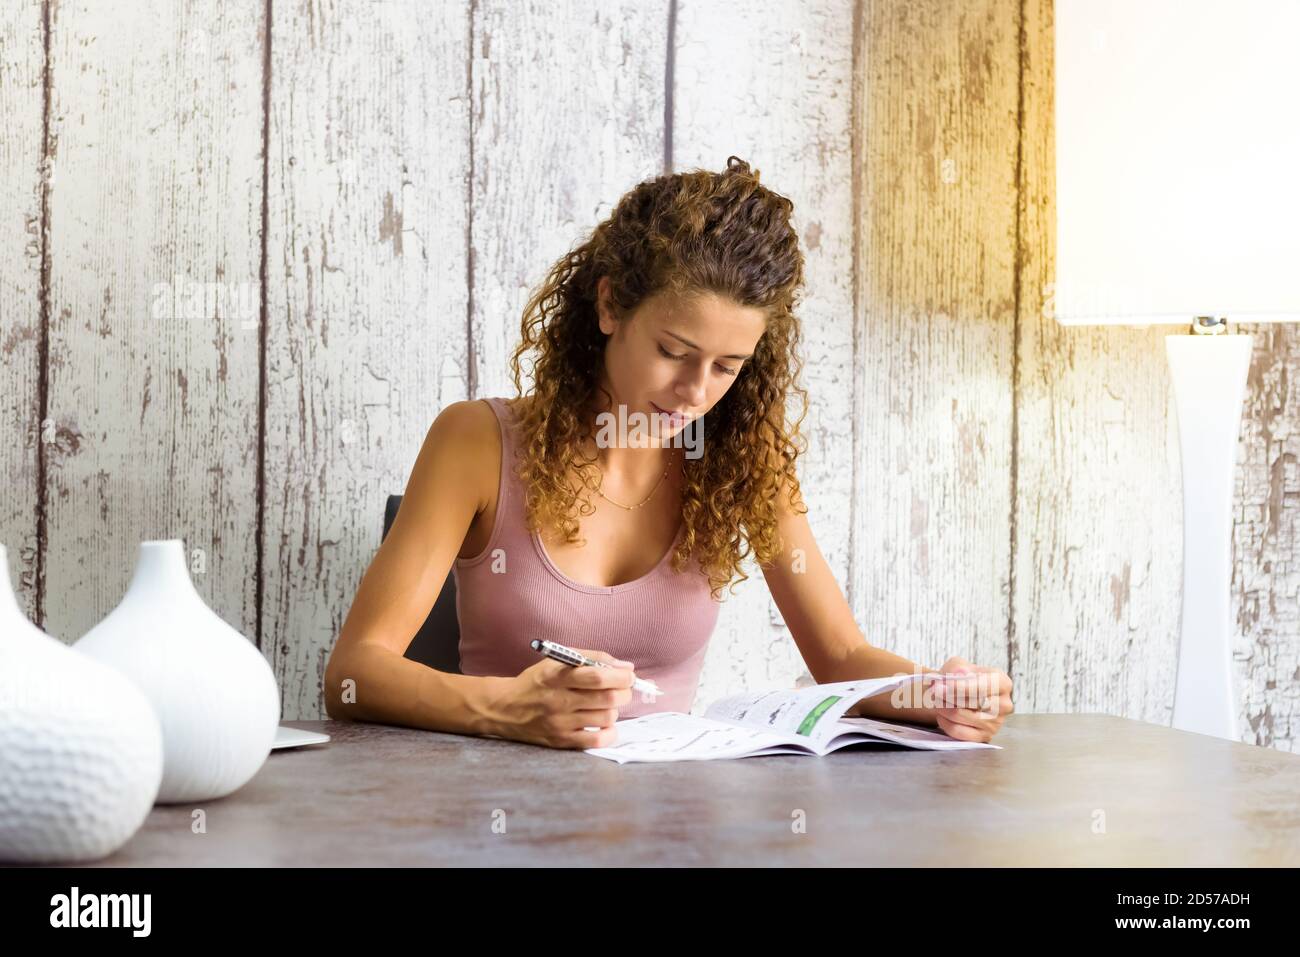 Attractive young woman working on crossword puzzles at home in a magazine seated at a table with copyspace Stock Photo